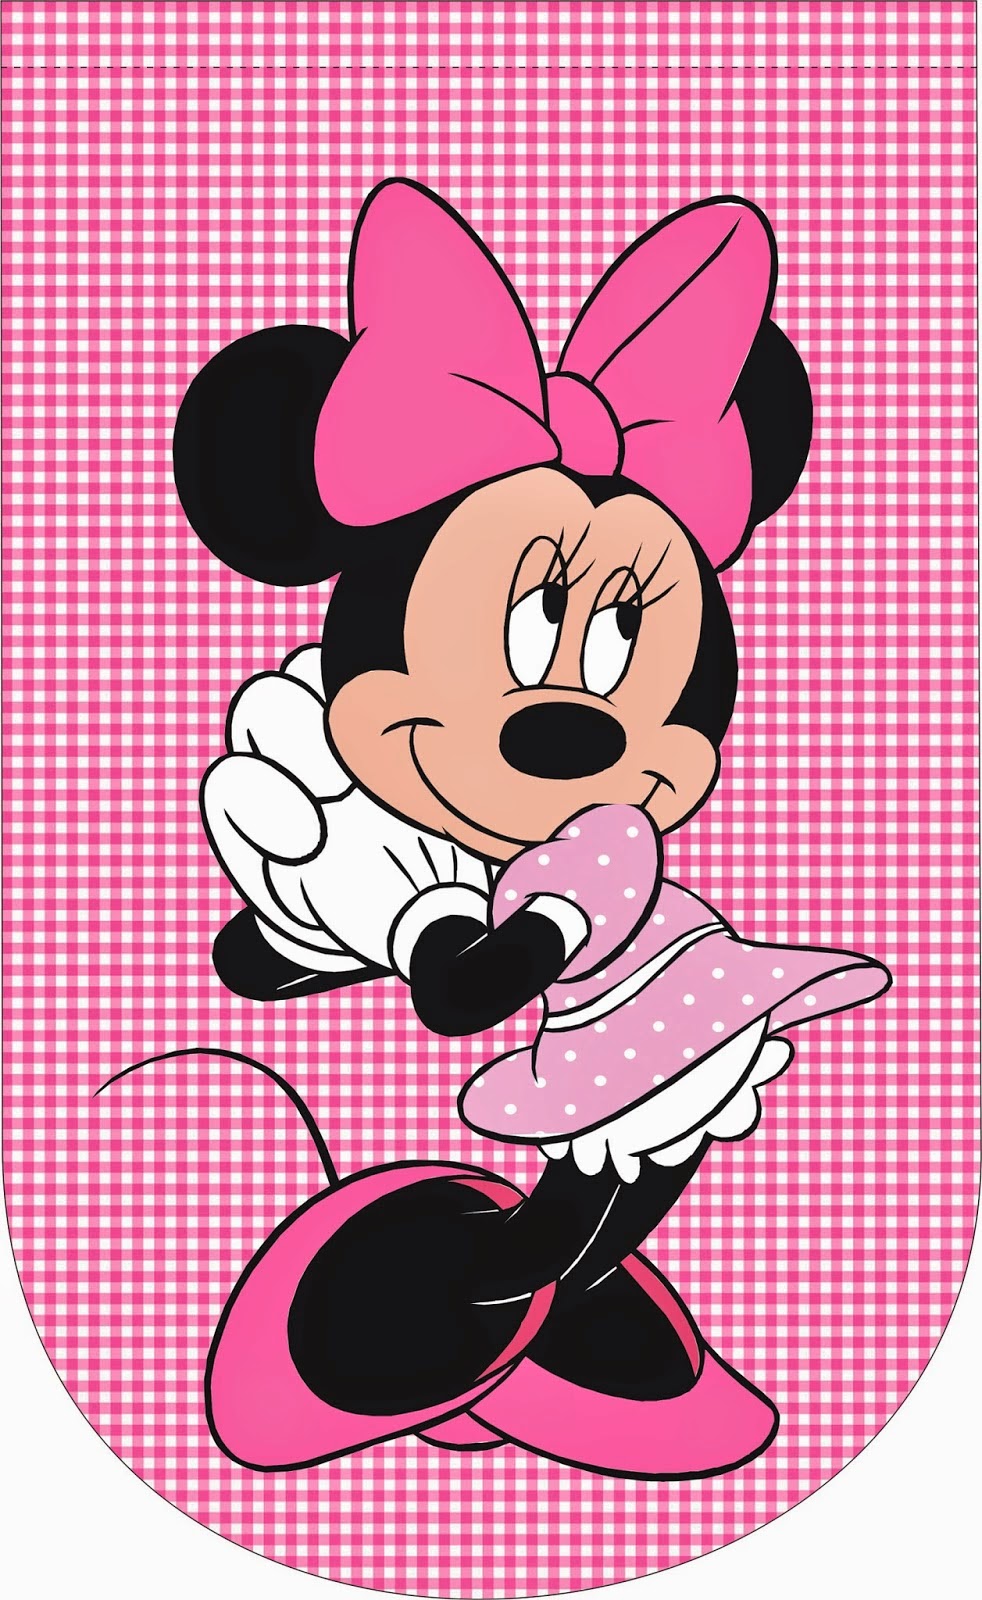 Minnie Pink Squares Free Party Printables and Boxes. - Oh My Fiesta! in  english